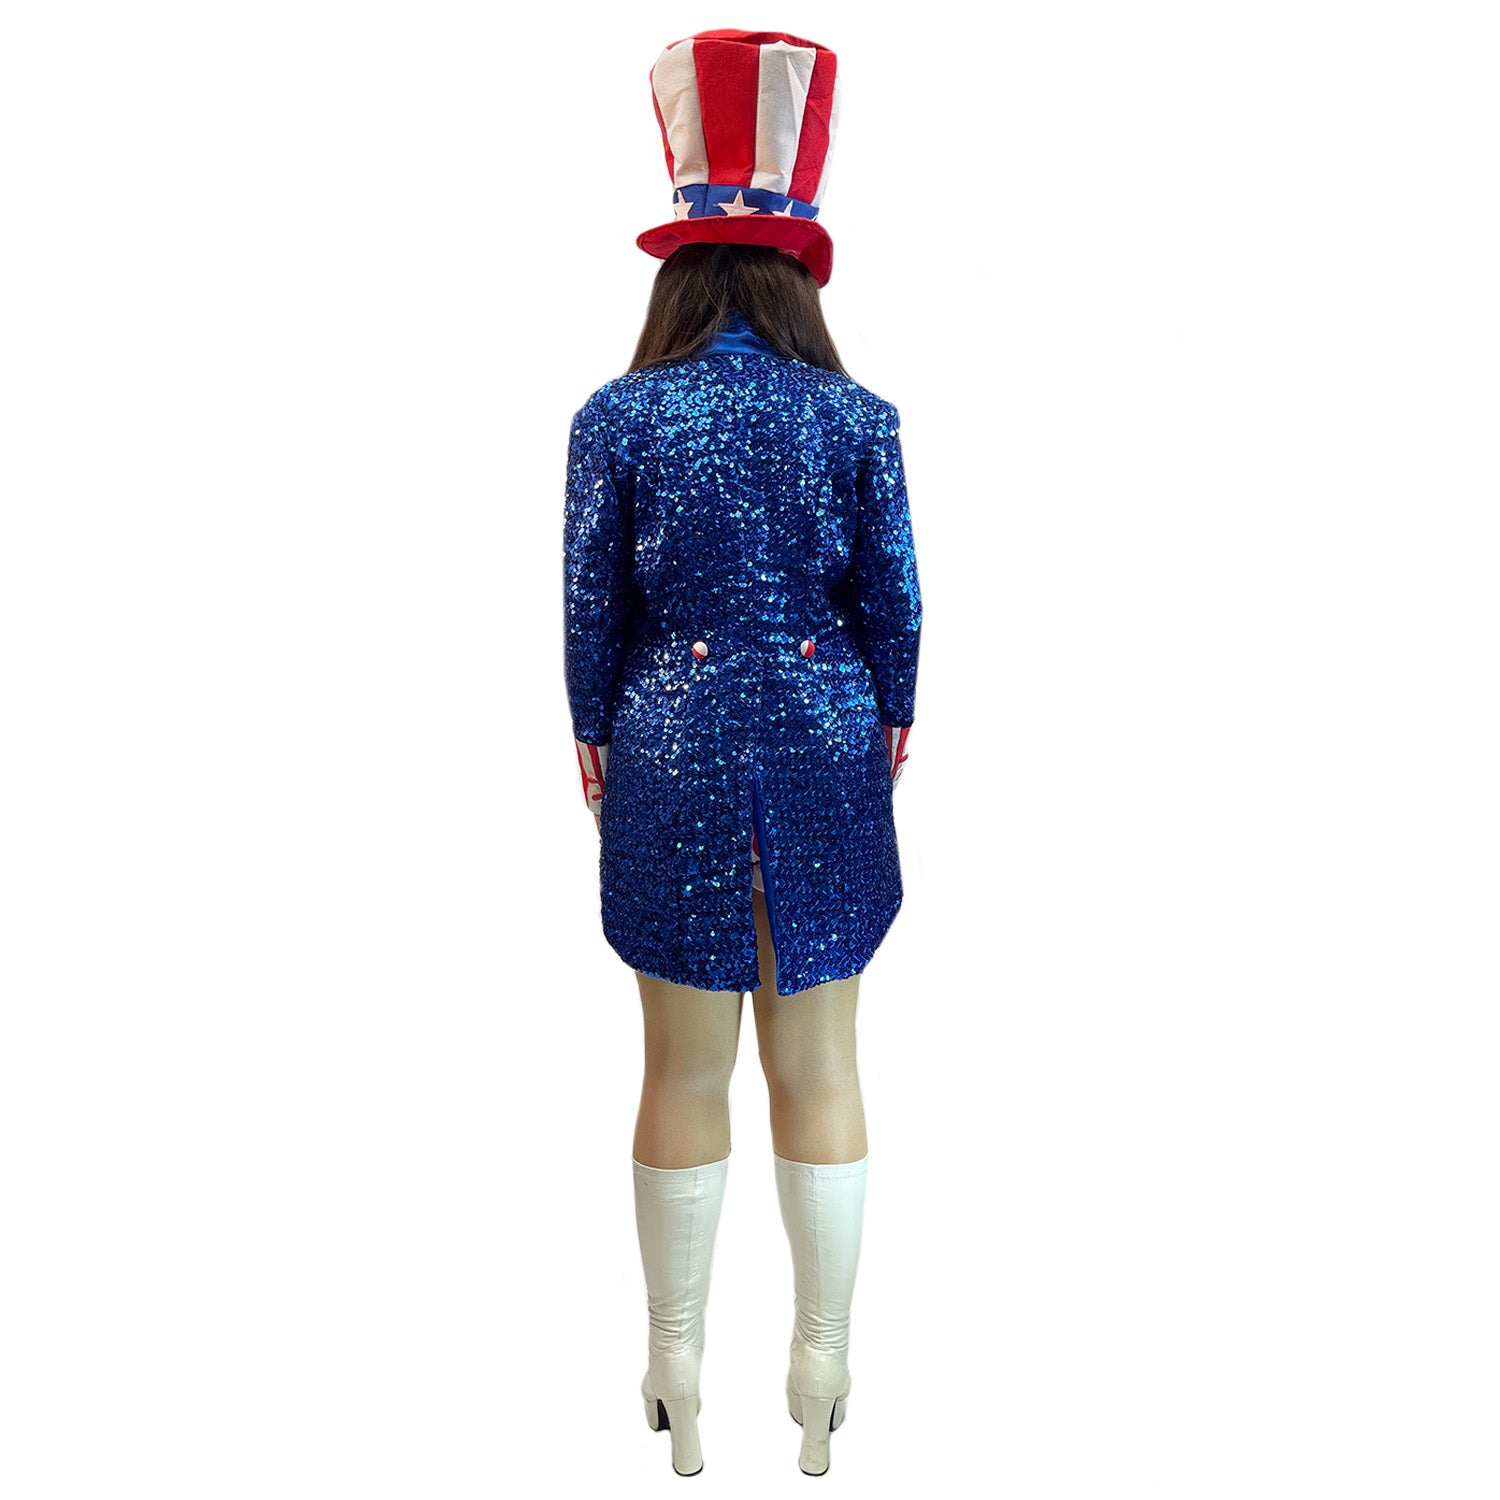 Miss Uncle Sam w/ Sequins 4th Of July Adult Costume